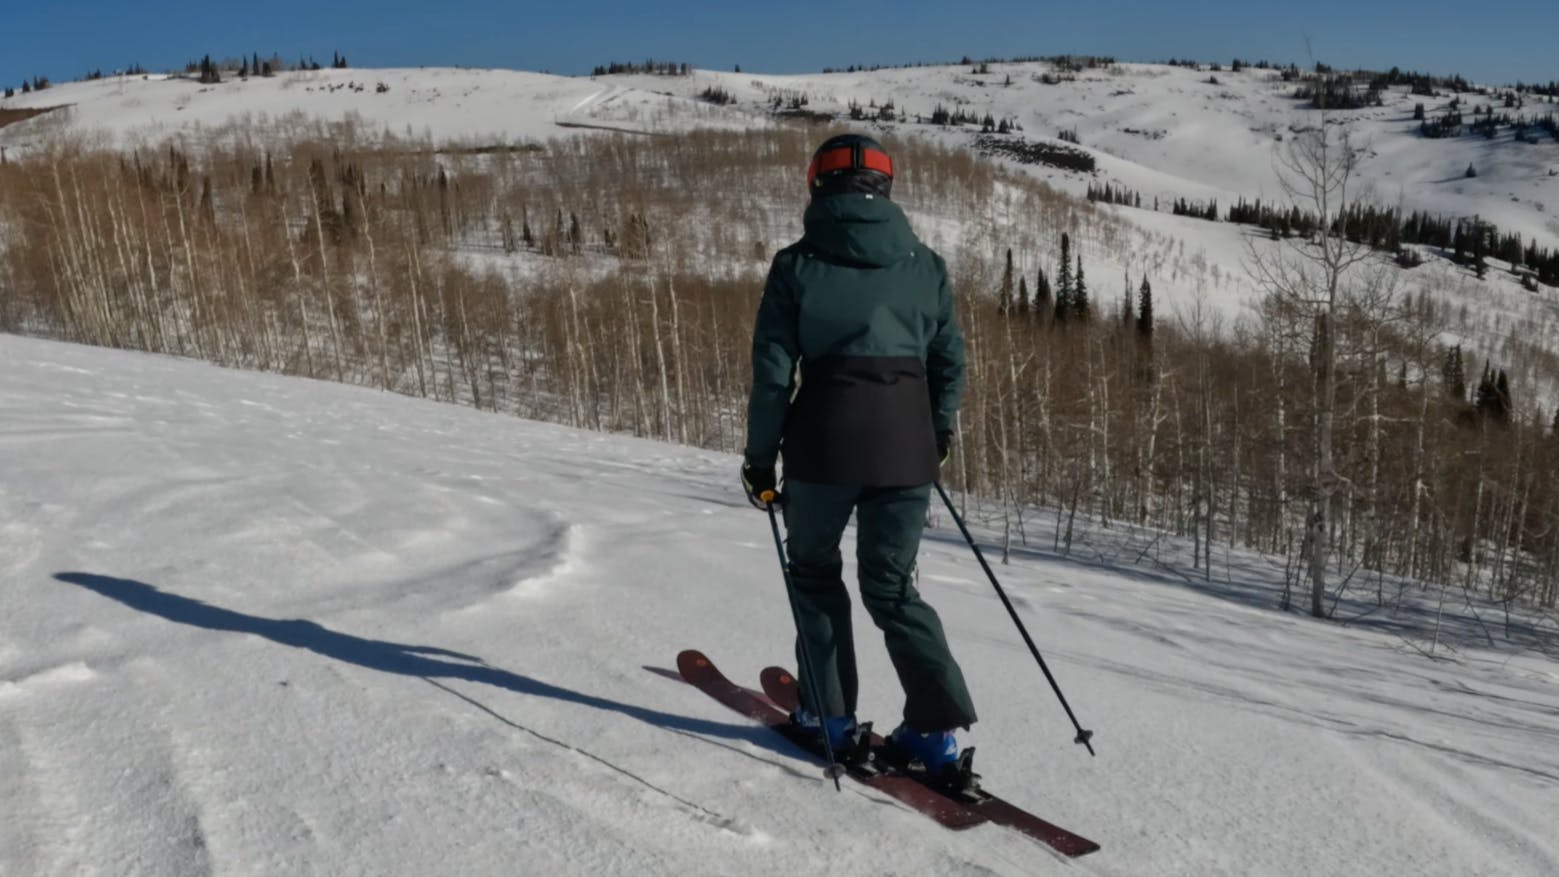 A skier on the 2023 Blizzard Black Pearl 97 Skis.